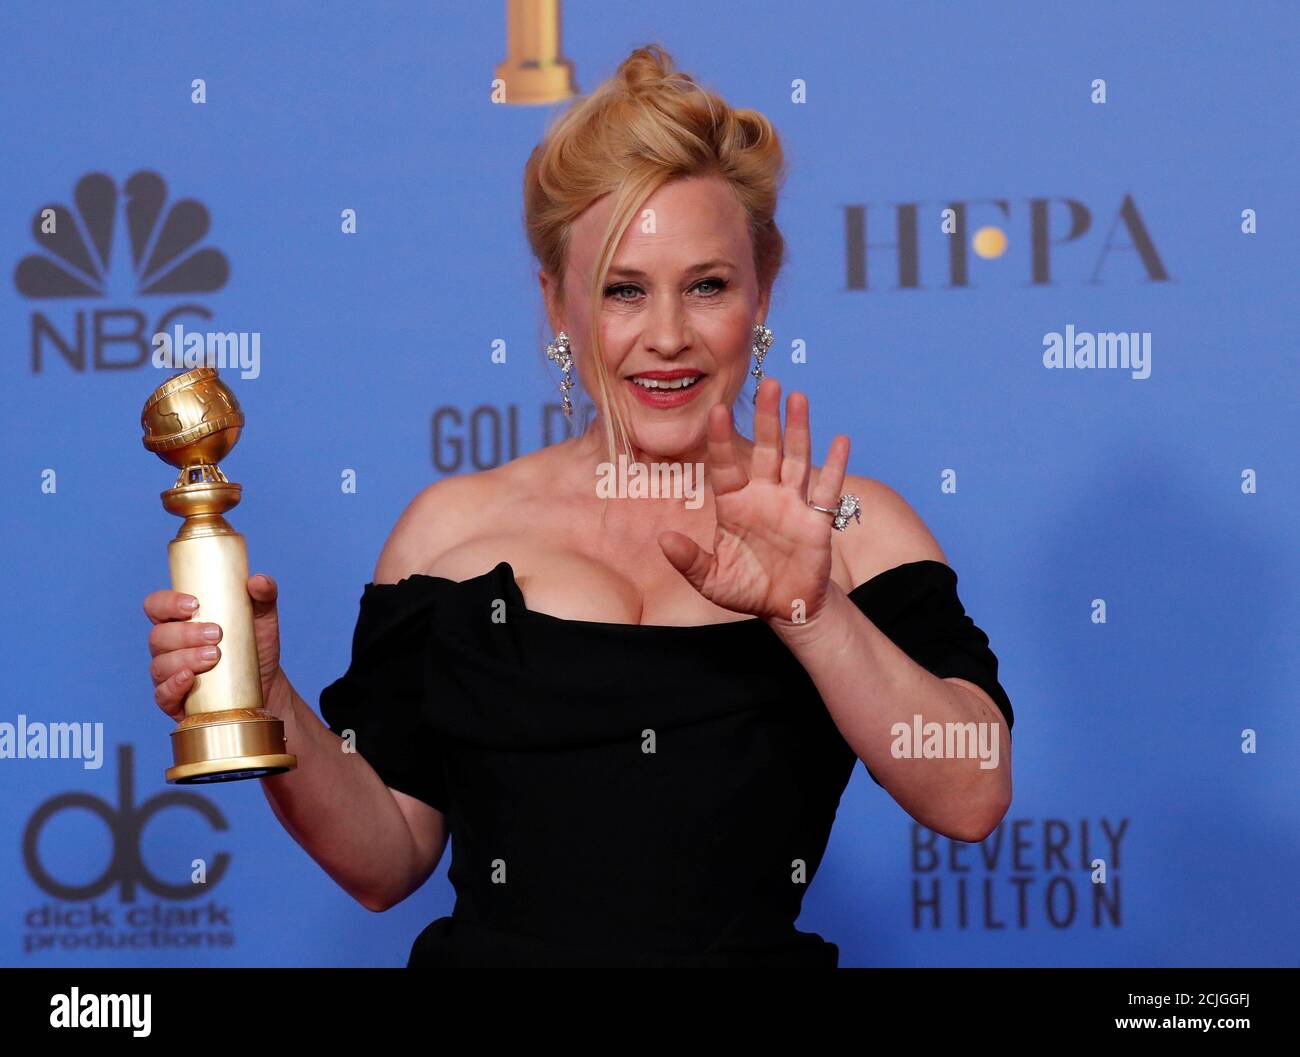 76th Golden Globe Awards - Photo Room - Beverly Hills, California, U.S., January 6, 2019 Patricia Arquette poses backstage with her trophy for Best Performance by an Actress in a Limited Series or Motion Picture Made for Television for 'Ecape at Dannemora'?. REUTERS/Mario Anzuoni Stock Photo